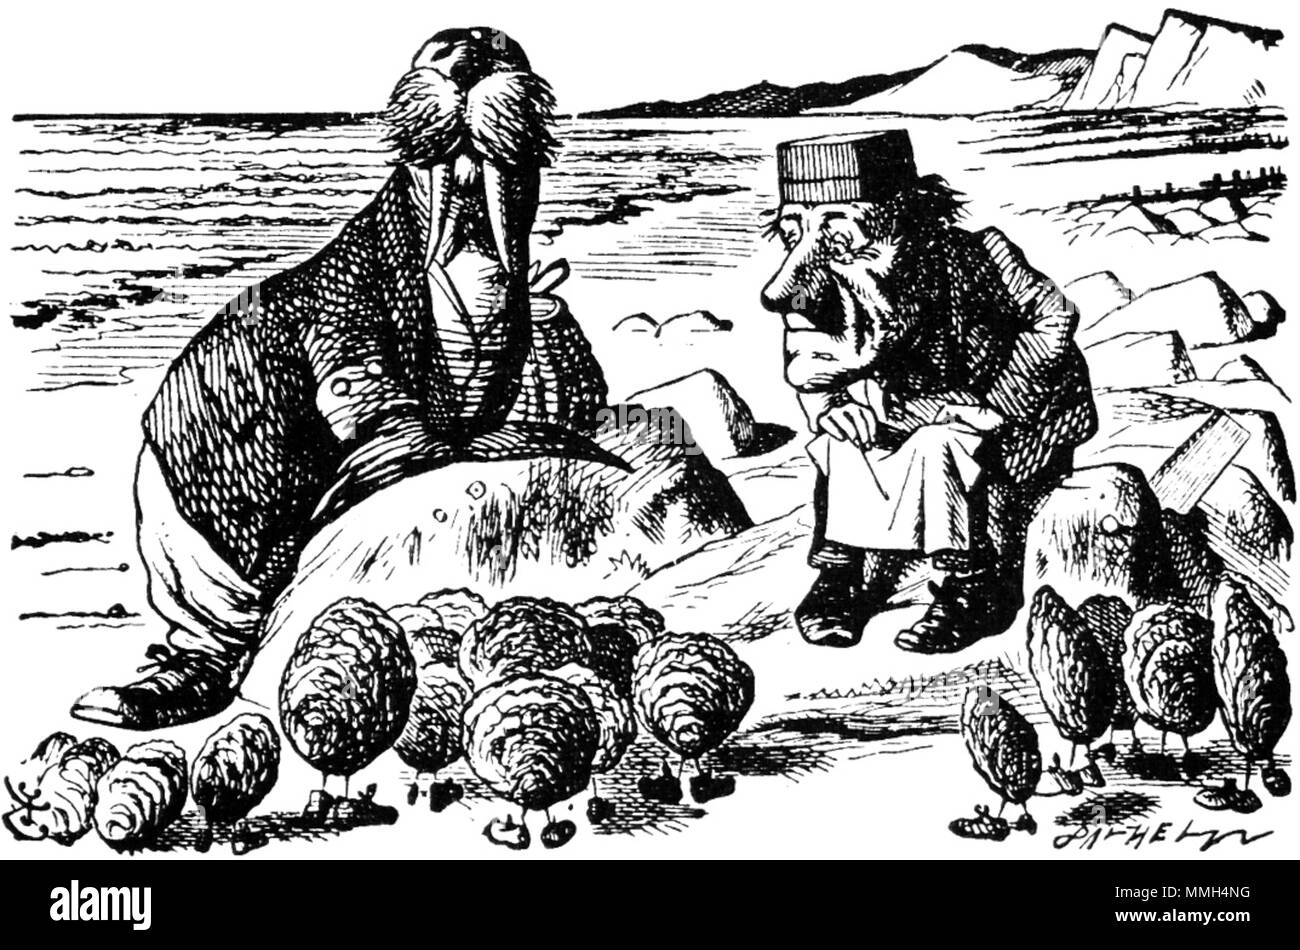 https://c8.alamy.com/comp/MMH4NG/english-a-scene-from-the-walrus-and-the-carpenter-by-lewis-carroll-drawn-by-sir-john-tenniel-in-1871-4-november-2007-original-upload-date-the-original-uploader-was-mr-absurd-at-english-wikipedia-98-briny-beach-MMH4NG.jpg